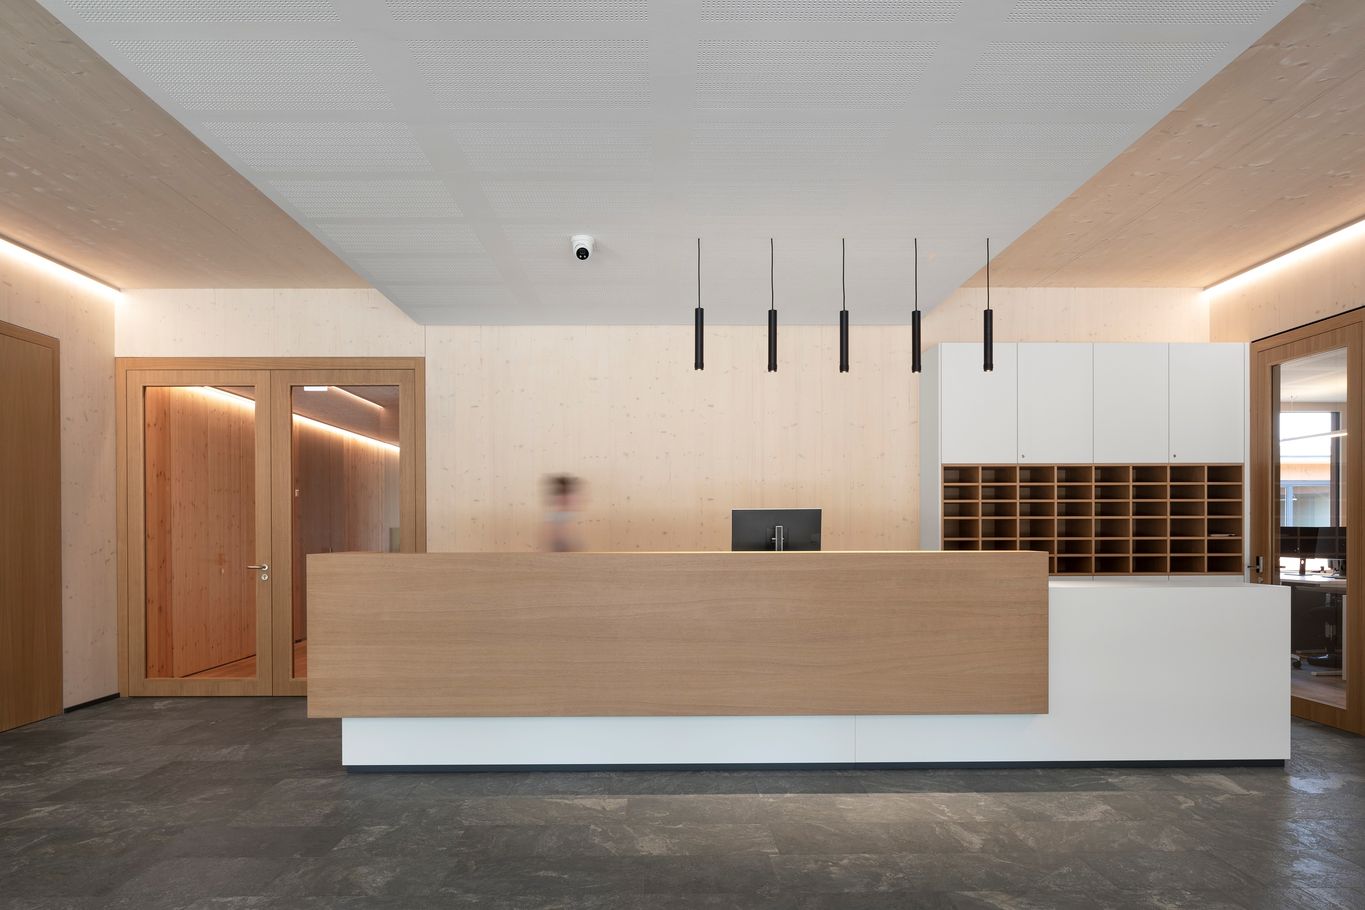 Reception area with suspended acoustic ceiling © www.florianhammerich.com